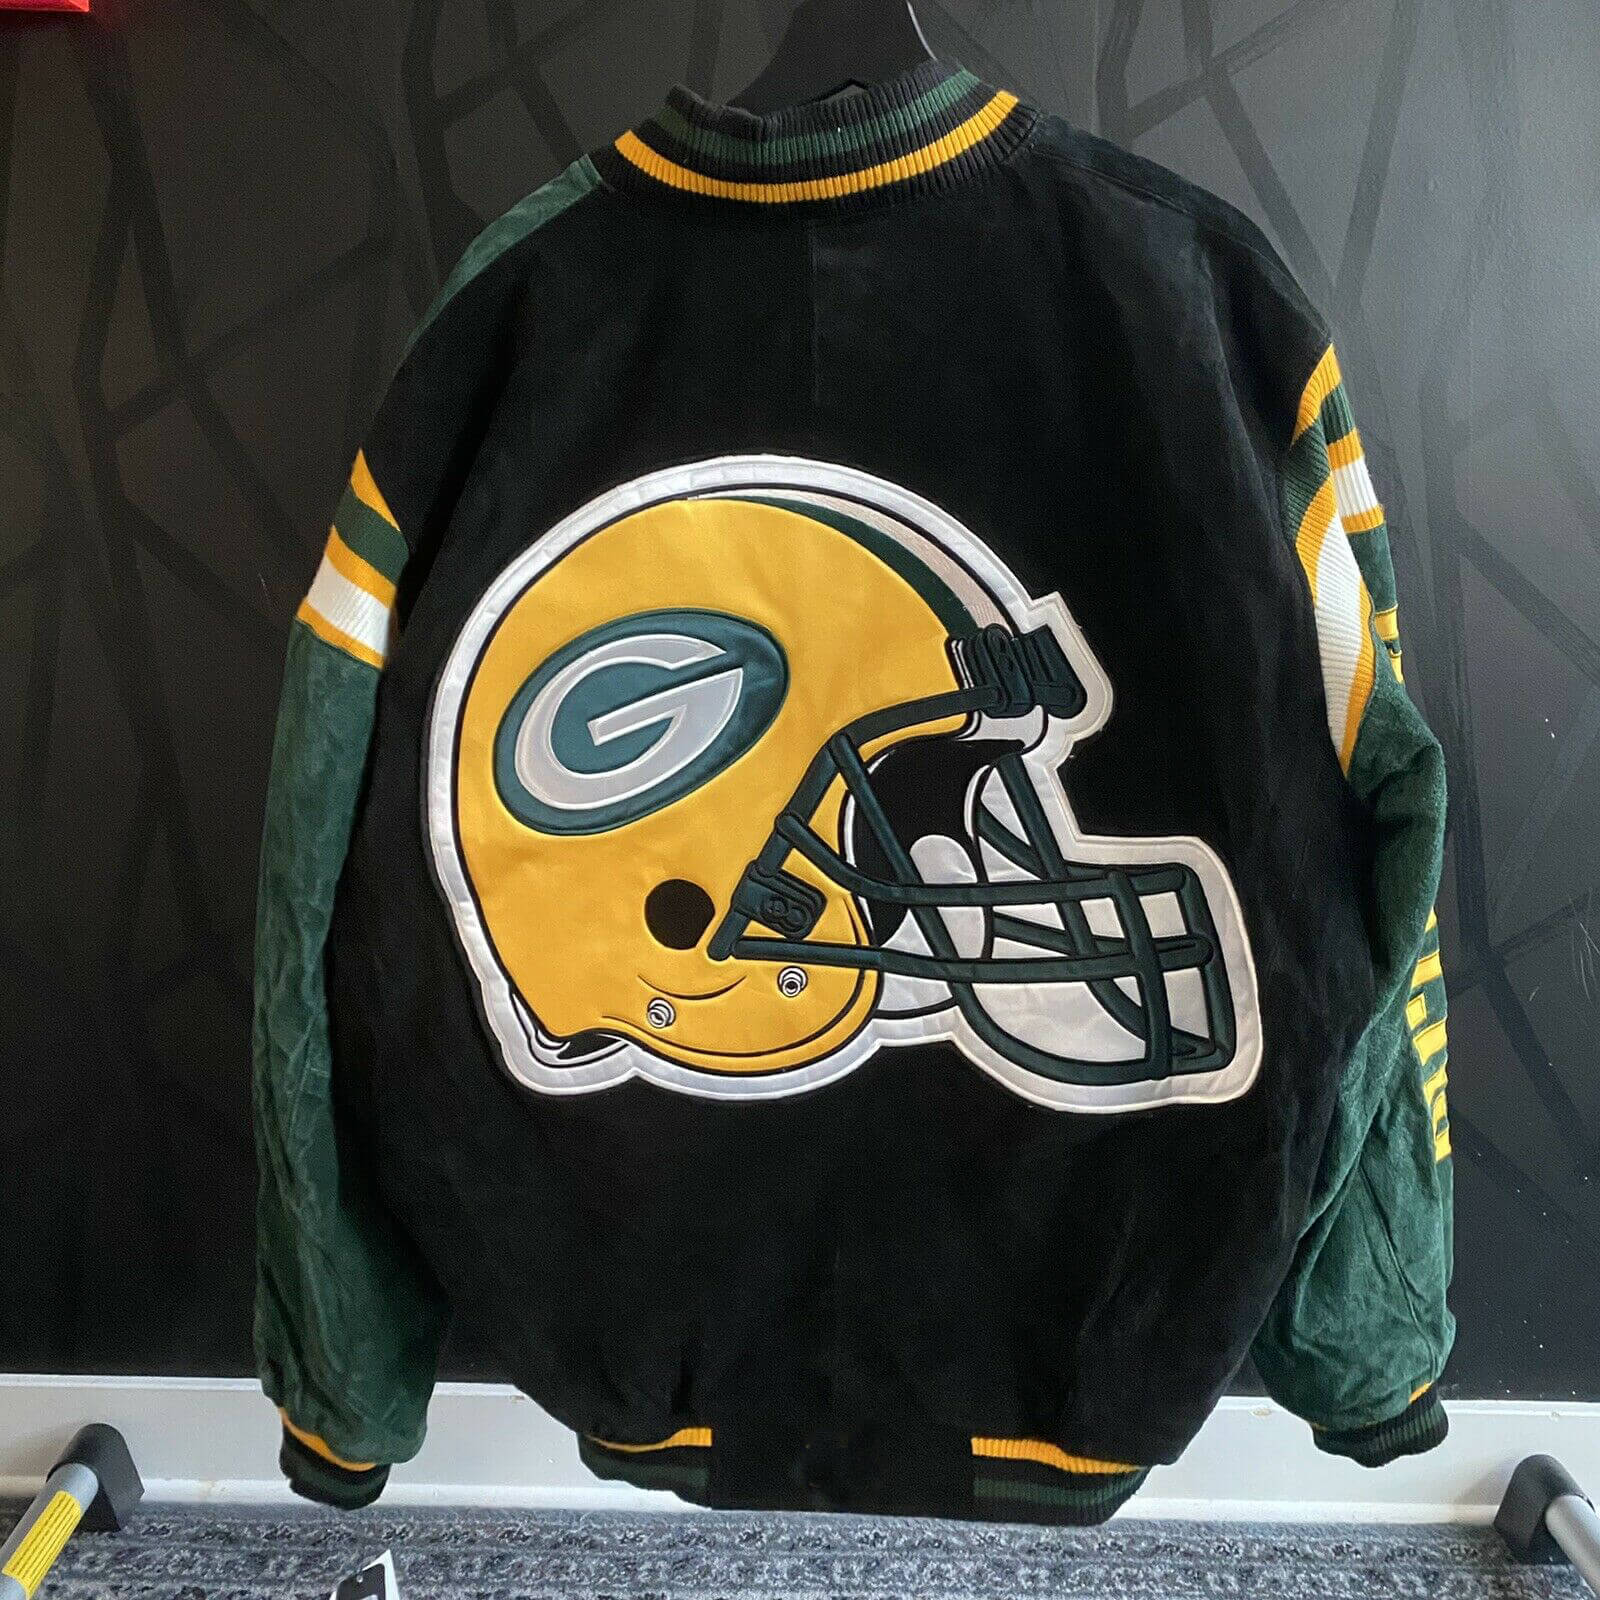 packers 4xl